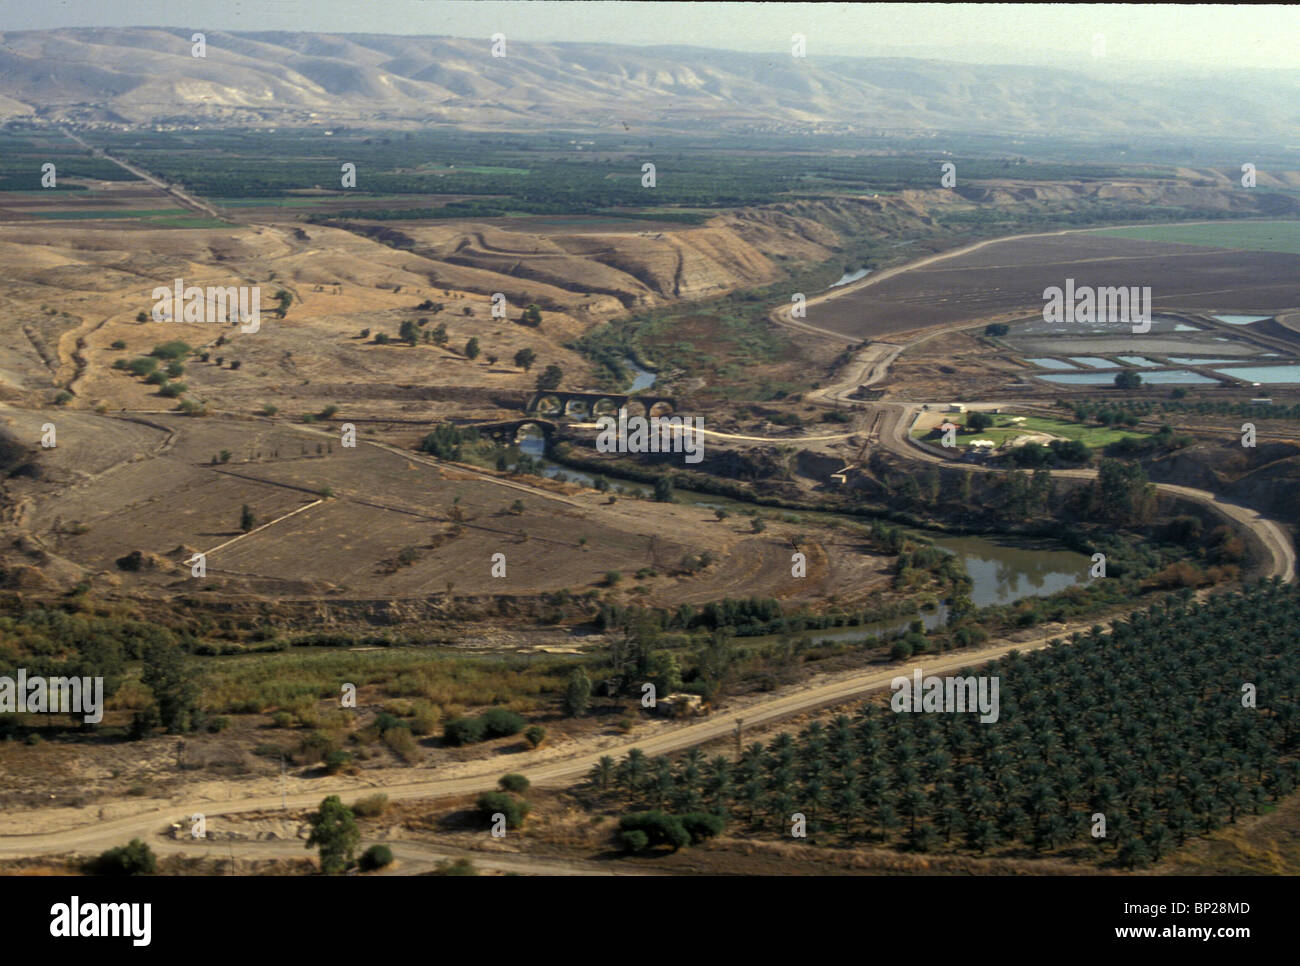 2226. RIVER JORDAN, SOUTH OF THE SEA OF GALILEE Stock Photo